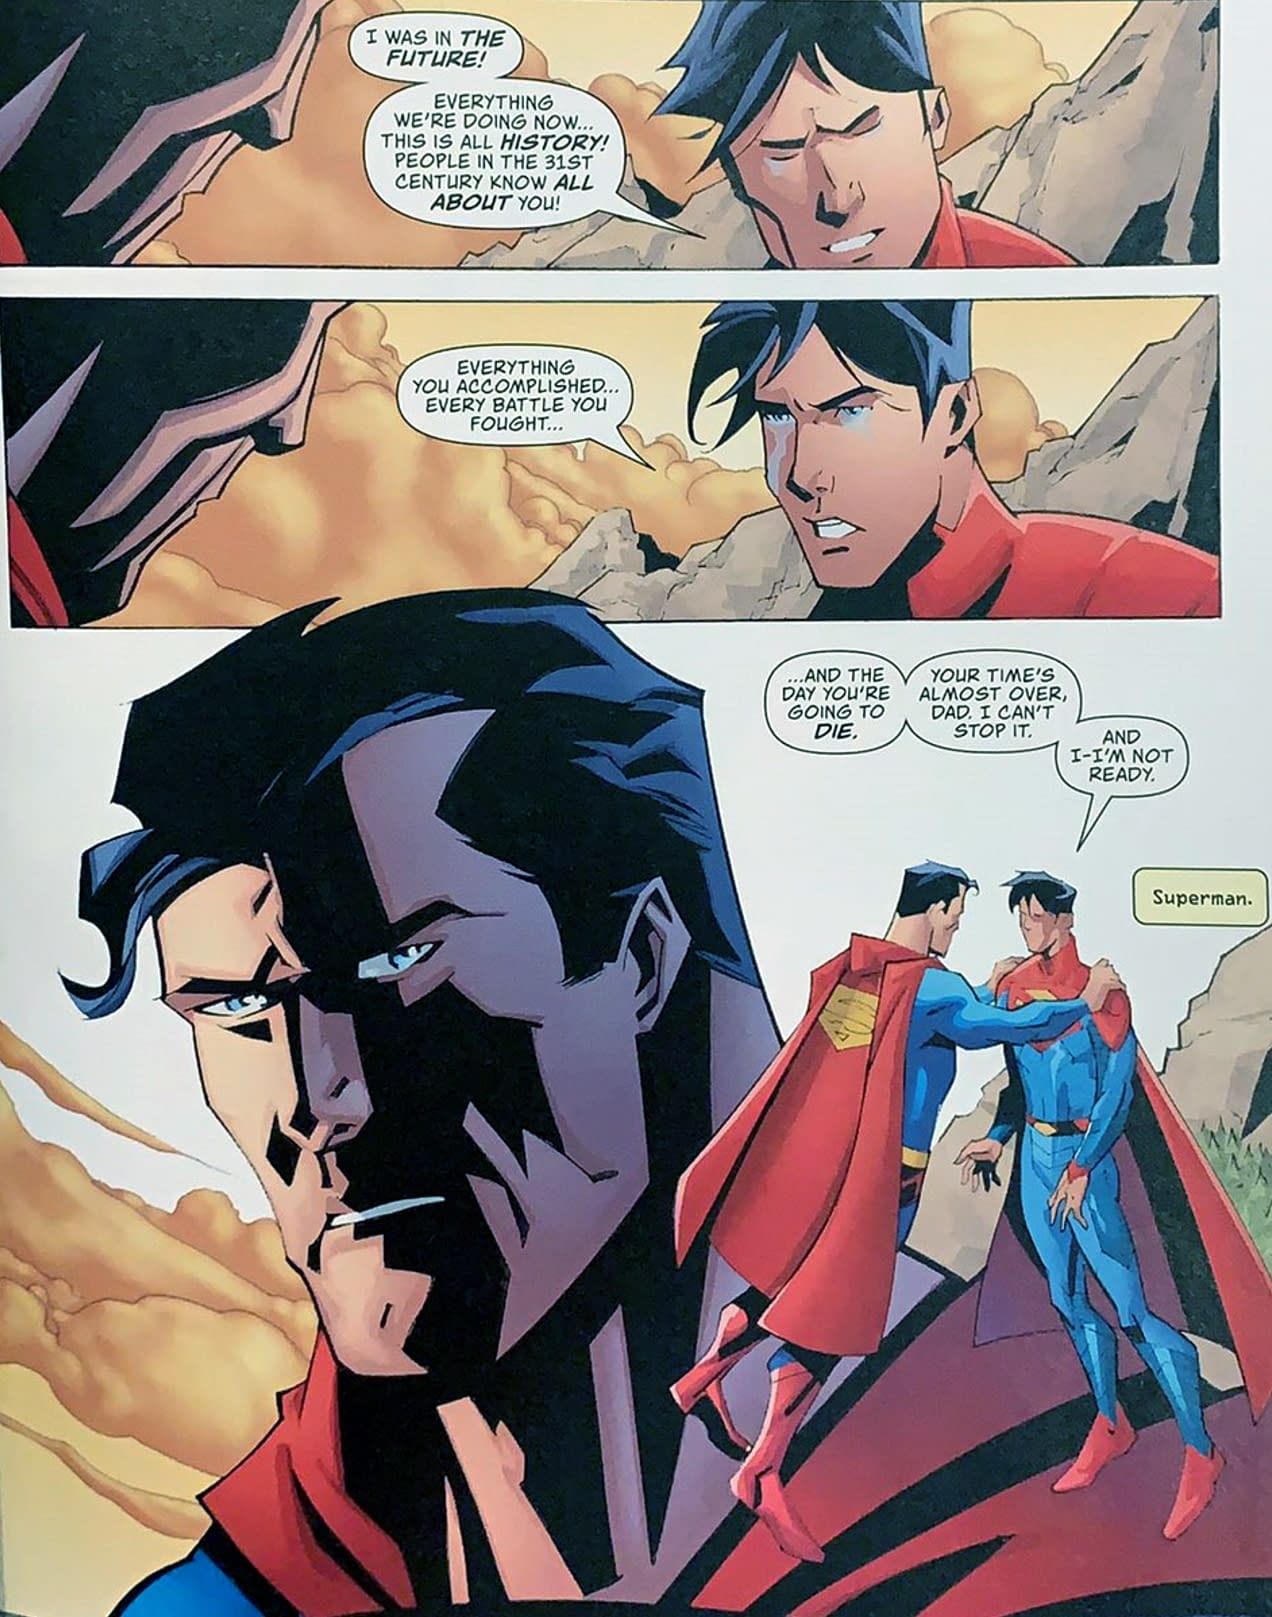 The Death Of Superman From DC Comics, Today (Spoilers)